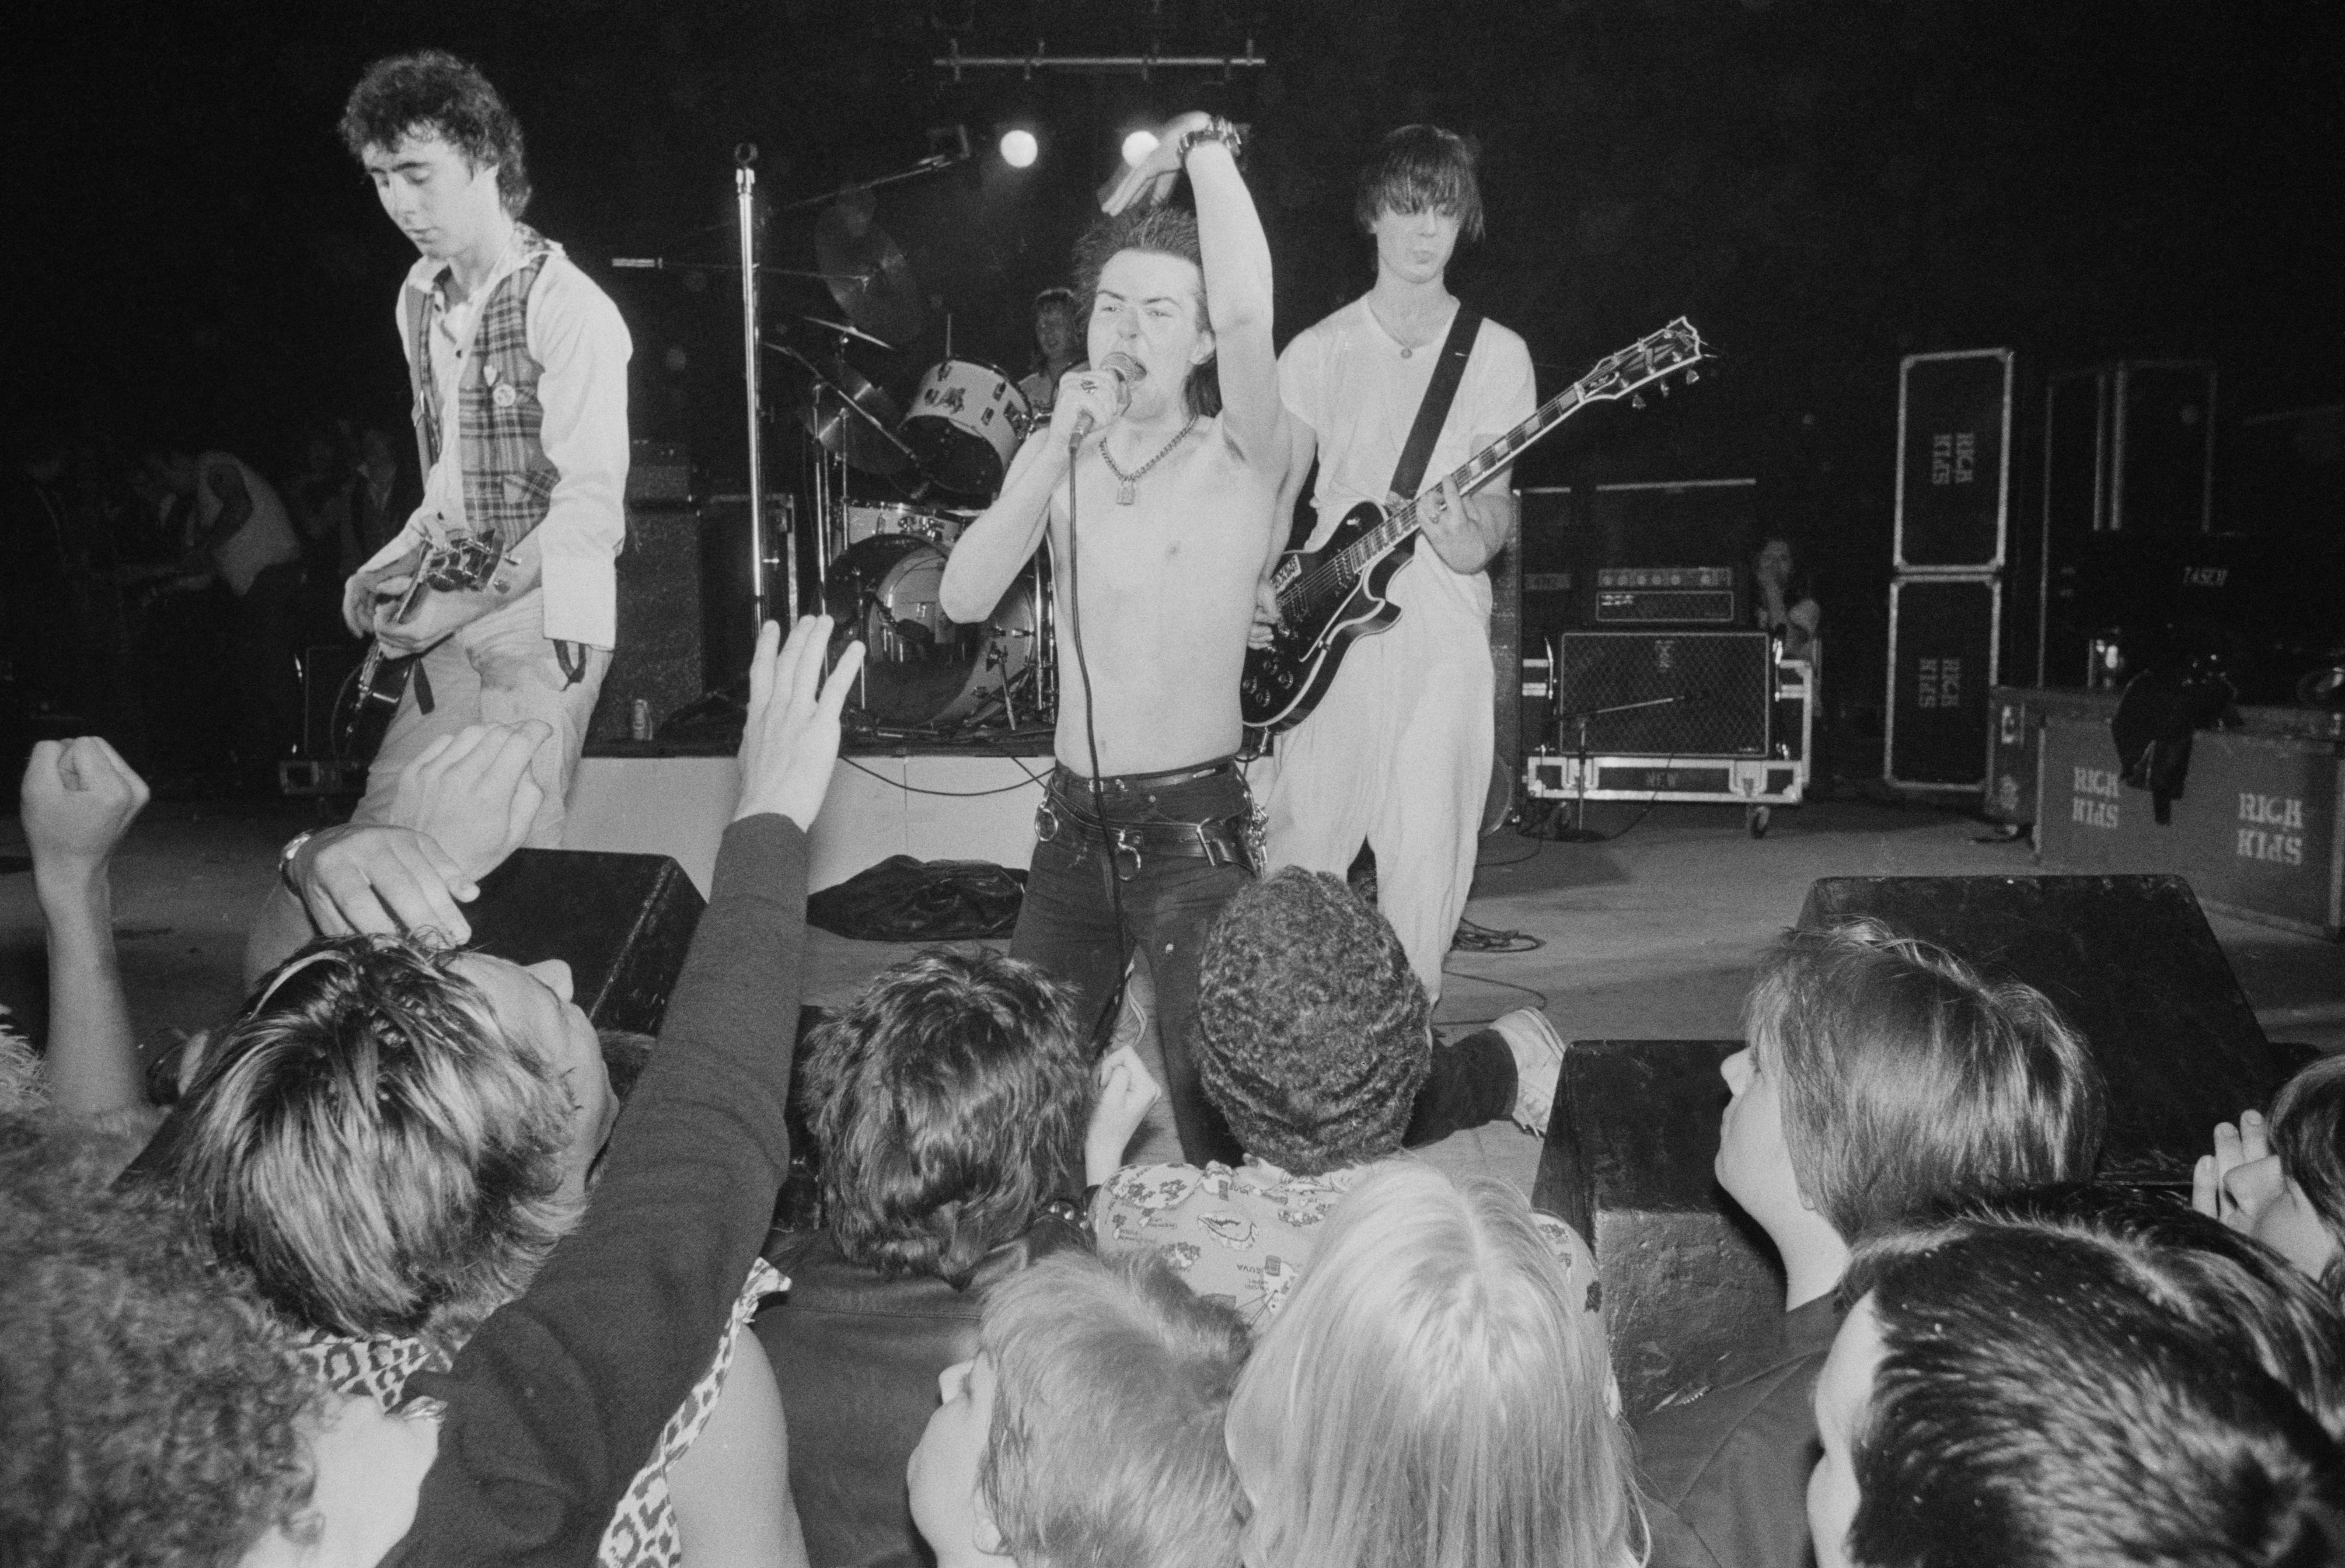 English bassist and singer Sid Vicious performs with the Vicious White Kids at Electric Ballroom, 15 August 1978. From left to right: Glen Matlock, Rat Scabies, Sid Vicious, Steve New